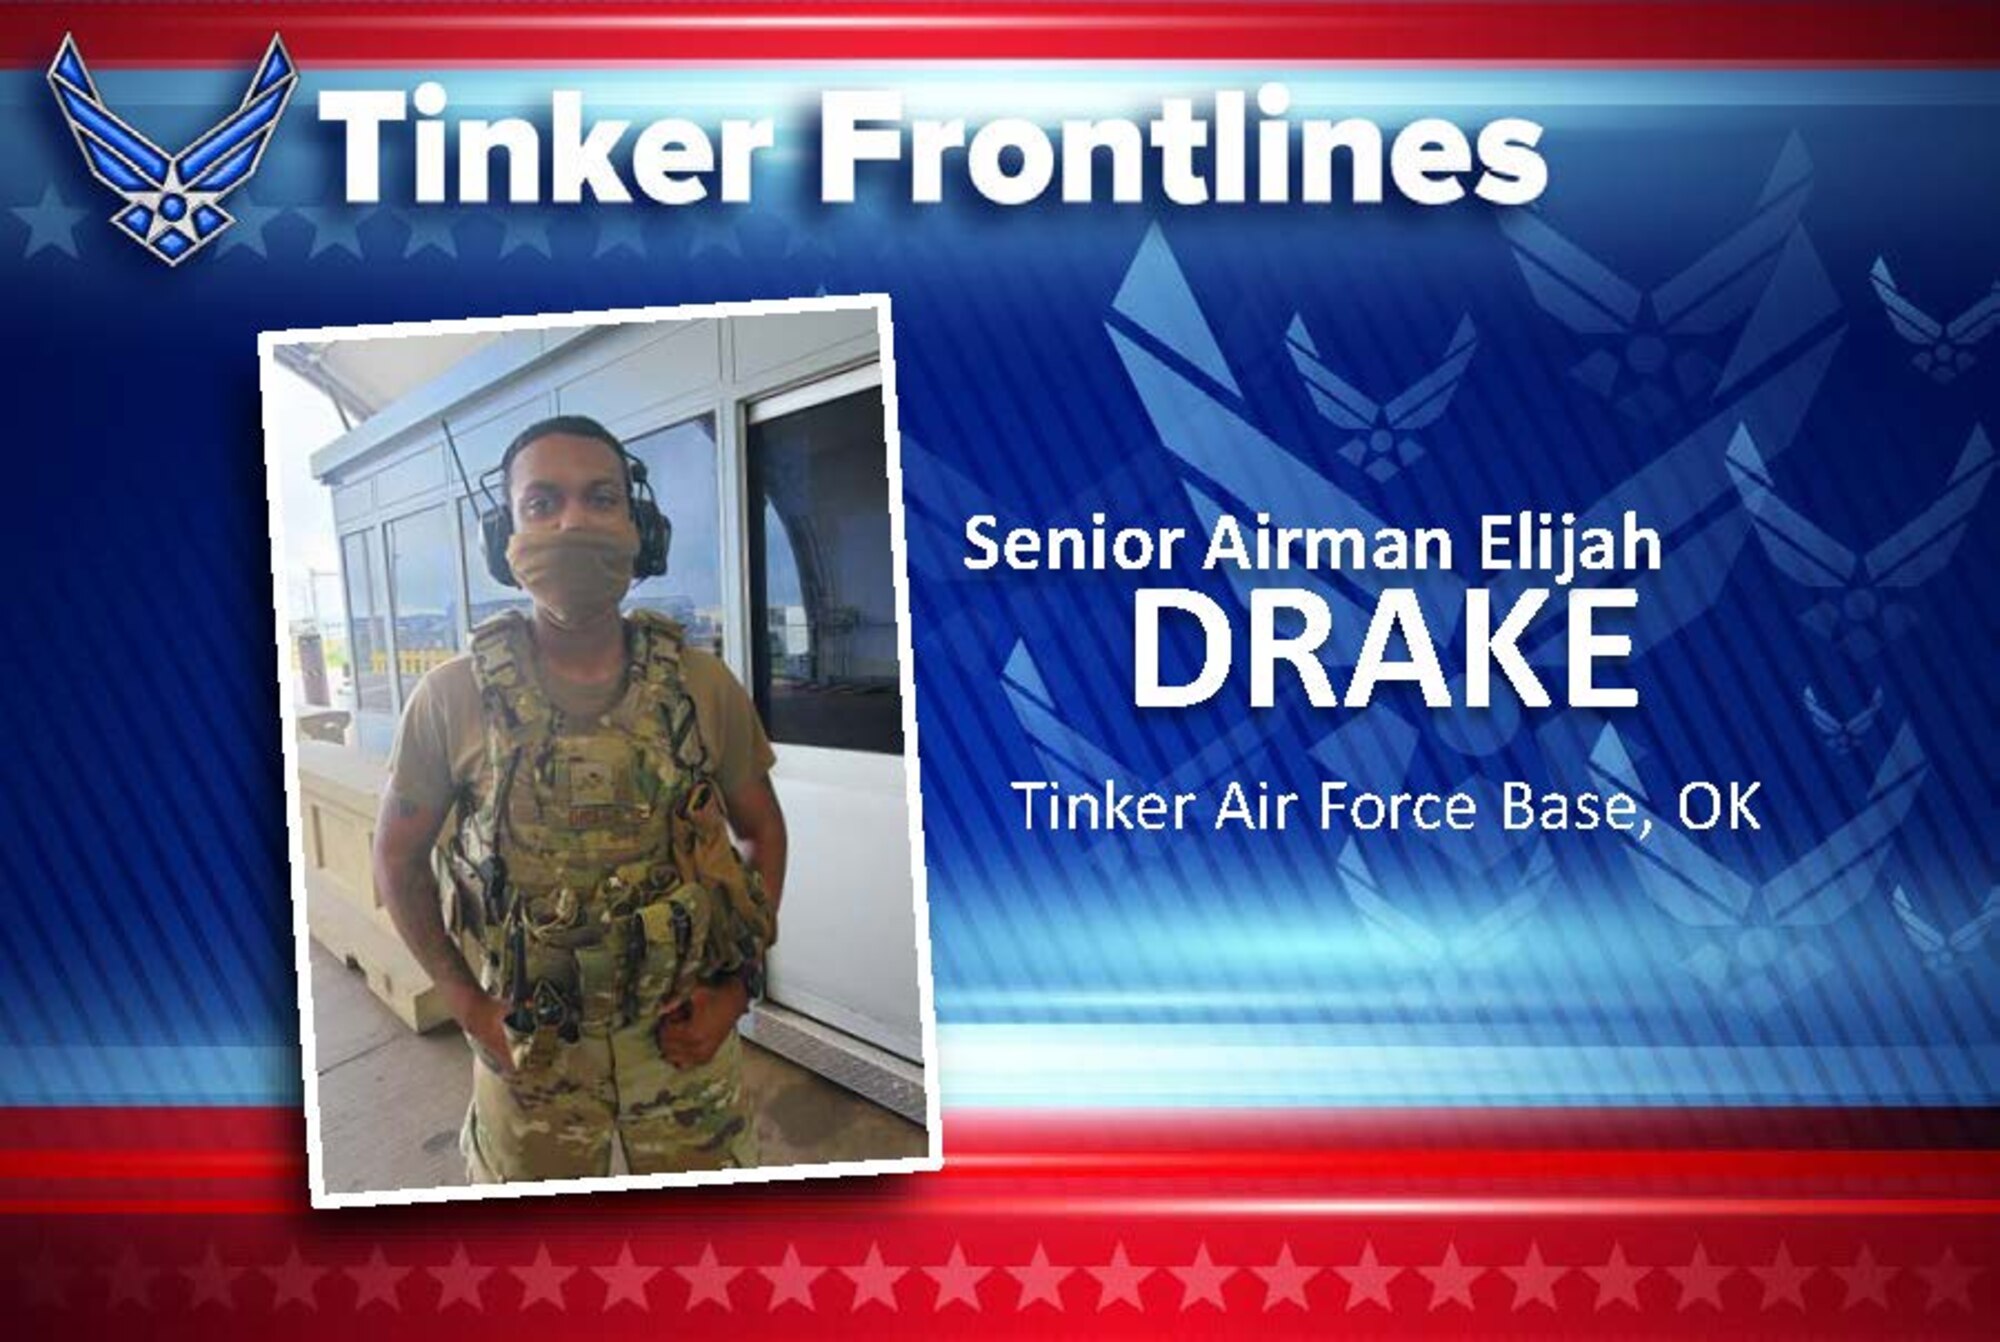 Senior Airman Elijah Drake is a vehicle search area member with the 72nd Security Forces Squadron and has been in the Air Force for two and a half years.